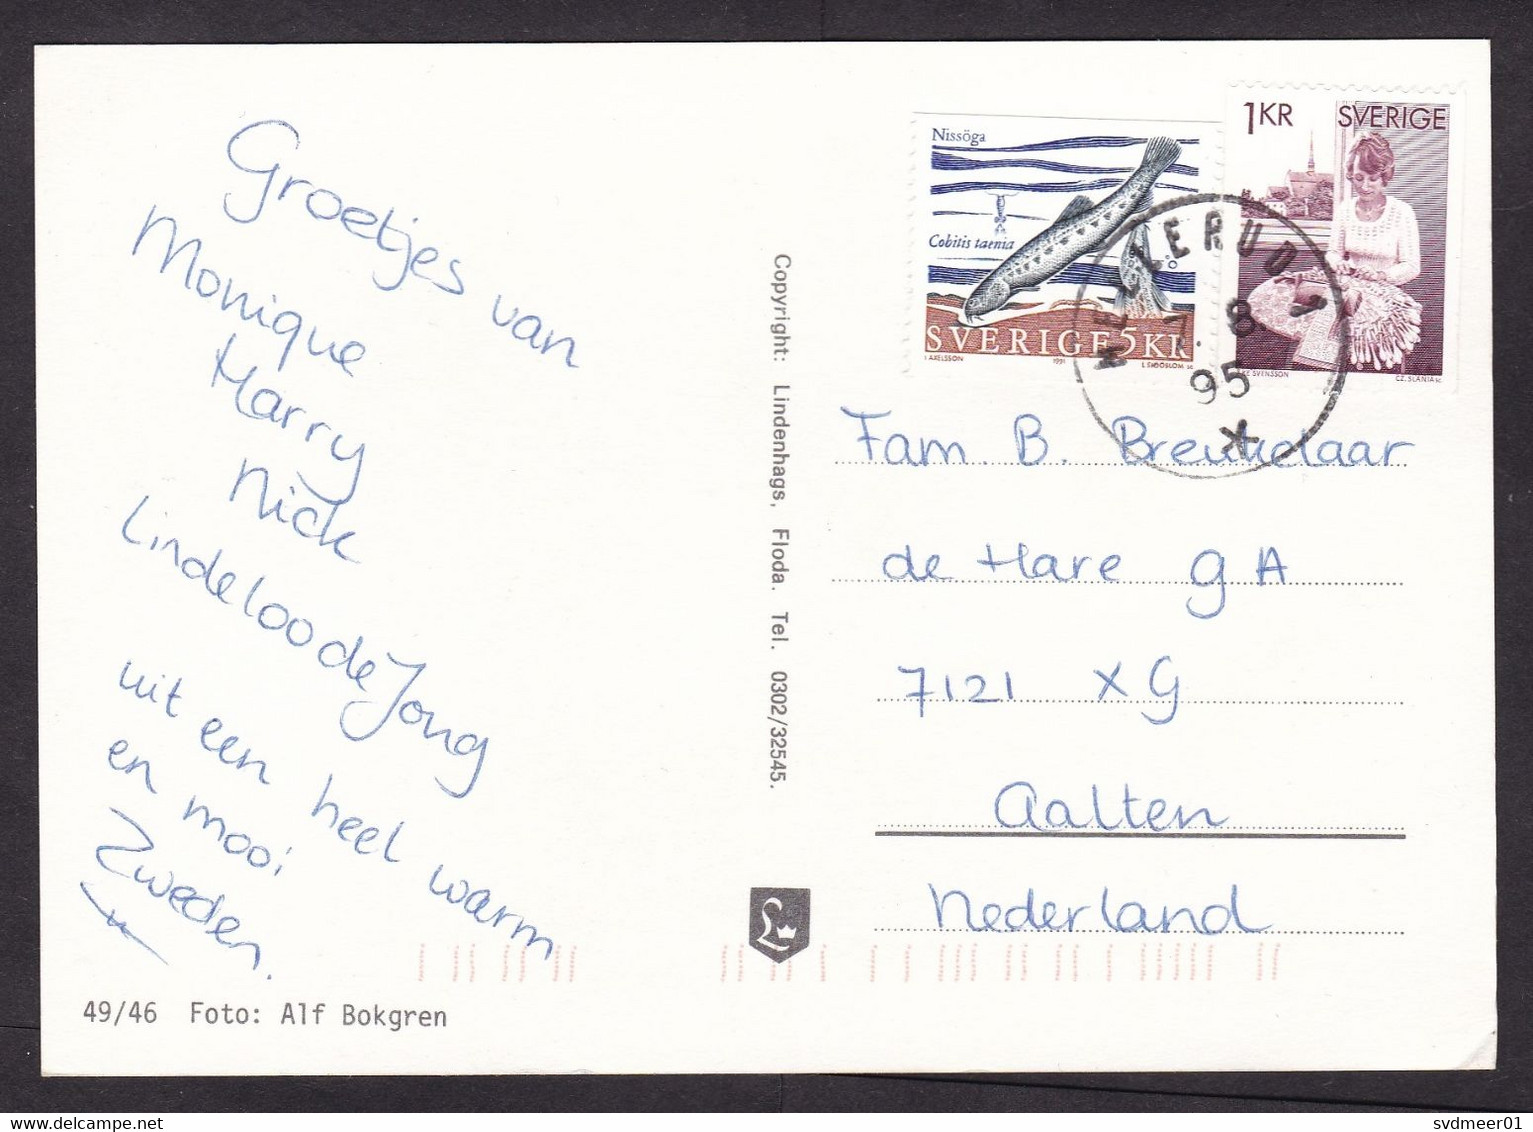 Sweden: Picture Postcard To Netherlands, 1995, 2 Stamps, Fish, Lady, Card: Dalsland (traces Of Use) - Briefe U. Dokumente